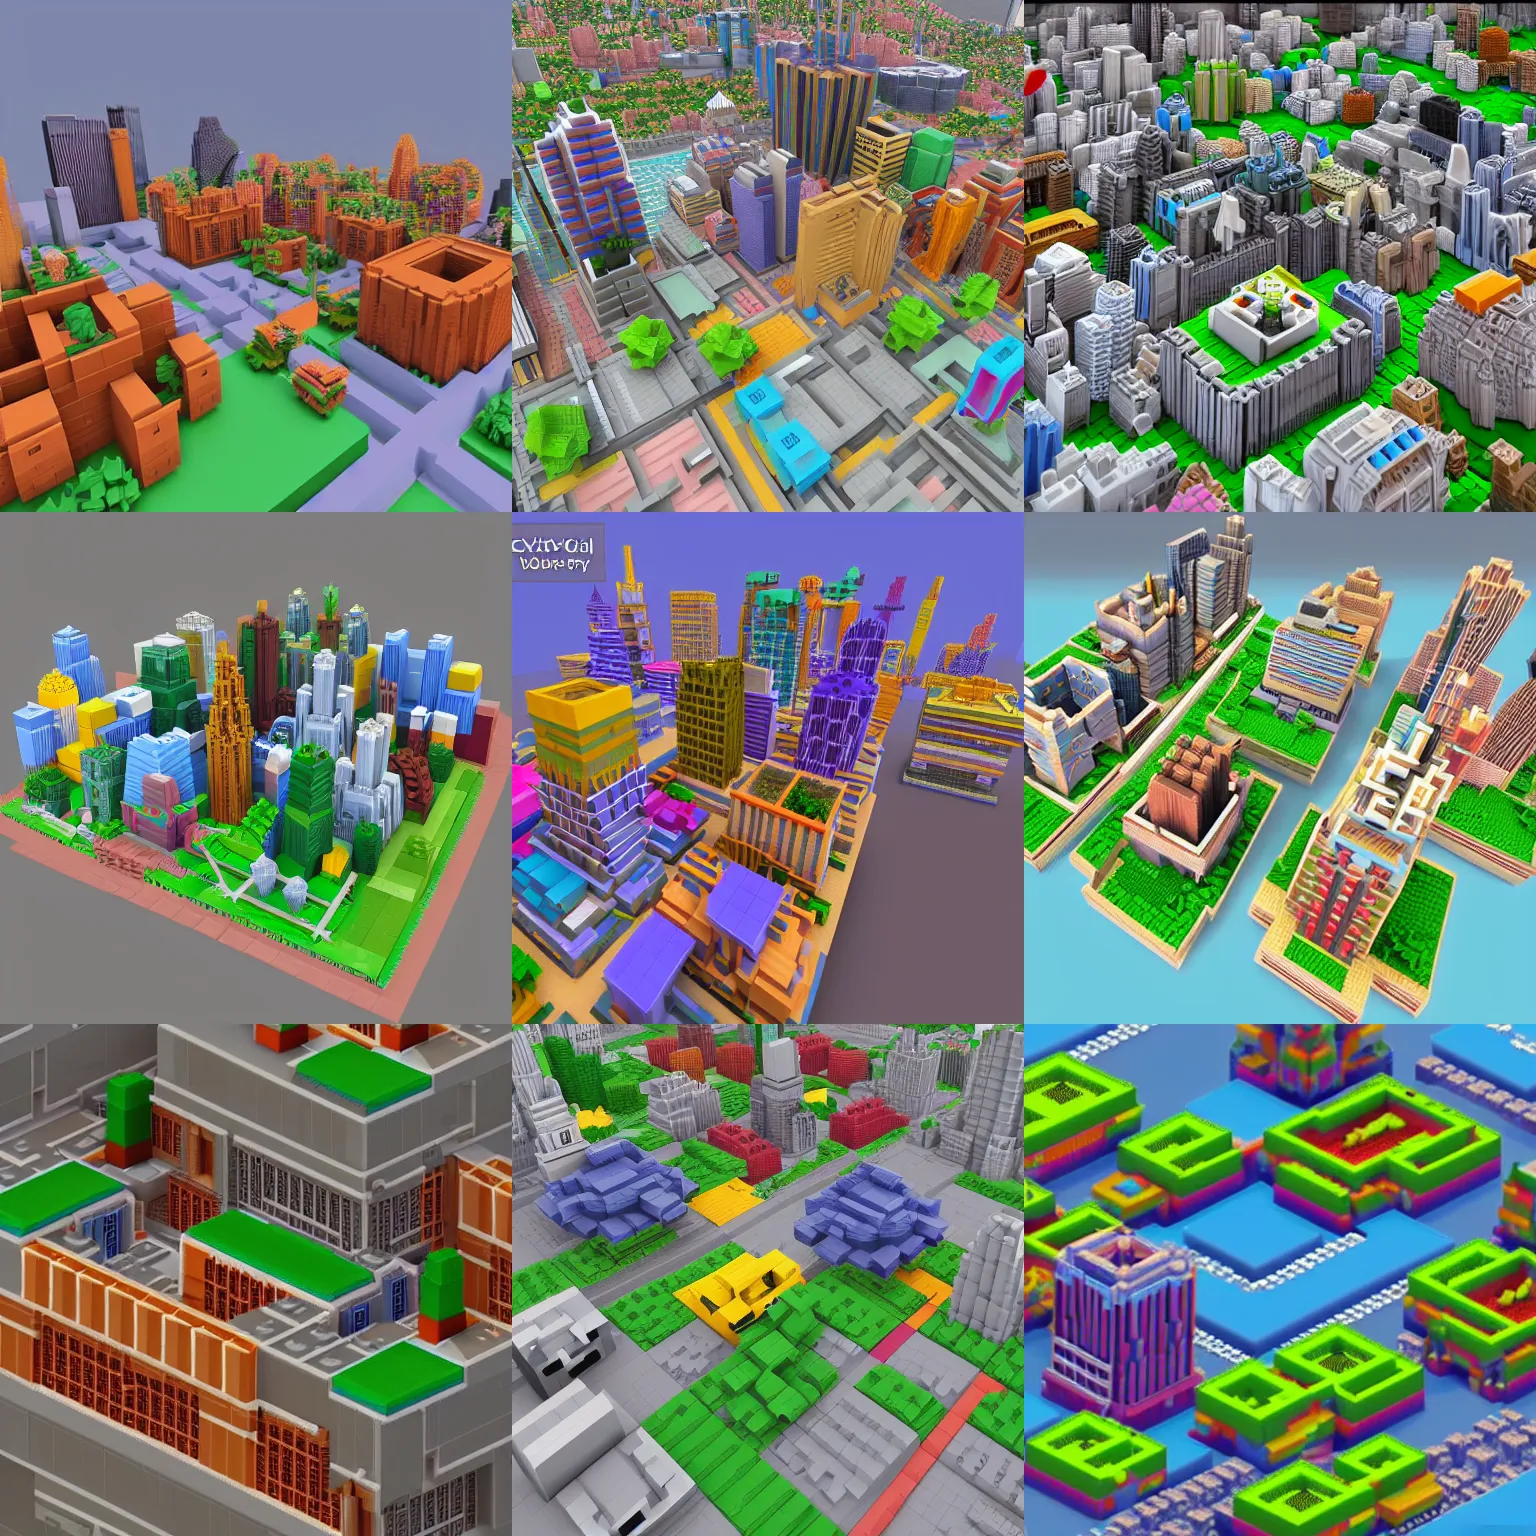 Prompt: Voxel city - Voxel art By.Sir Carma pixelart-3d-con-magicavoxel-winmac ephtracy on Twitter: #MagicaVoxel 0.97.4 released : Emissive Area Lighting https://t.co/fjy7fos5cb https://t.co/FpHXpesR1s voxel 3D model Cyberpunk City Block 3D voxel model ephtracy on Twitter: #MagicaVoxel 0.97.4 released : Emissive Area Lighting https://t.co/fjy7fos5cb https://t.co/FpHXpesR1s ephtracy on Twitter: love this result, colorful lights blending ( city by… department 3D model Скриншот Voxel Quest Neon Voxel Buildings Cyber Room Minecraft Plans, Minecraft Designs, Isometric Art, Isometric Design, 3d Pixel, Pixel Art, Urban Landscape, Landscape Design, Cyberpunk City Cartoon Cinema Low Poly 3D Models Home Design Game Help Ephtracy On Twitter Quot Improved Street Light Magicavoxel Random Town 3D Model Tokyo suburb - Voxel Art Animation on Behance Pixel Art, 3d Pixel, Art Isométrique, Sci Fi City, Tokyo City, Game Environment, Environment Design, Cyberpunk City, Isometric Art Voxel City Scene 004 by gendosplace Industries of Titan v0.11.0 - игра на стадии разработки Build i did Minecraft Les constructions de Noodlor : camp Blox 3D World Creator Voxel Design sci fi futuristic building 3d max Voxel painting- a nostalgic house Isometric low poly cyberpunk city Cyberpunk Street 3d sci fi futuristic building 3D Low Poly Isometric | Gaming Bedroom 3D,game design ,pixel,voxel building city 3D model city 3D Little Shop Lot | Japanese Themed | Voxel Art Nelson and Murdock Law Office from Marvel Avengers Academy 001 RT_Buildings-01 minecraft Cyberpunk City buildings digital car bus night light vehicles city skyscraper building voxel art voxelart